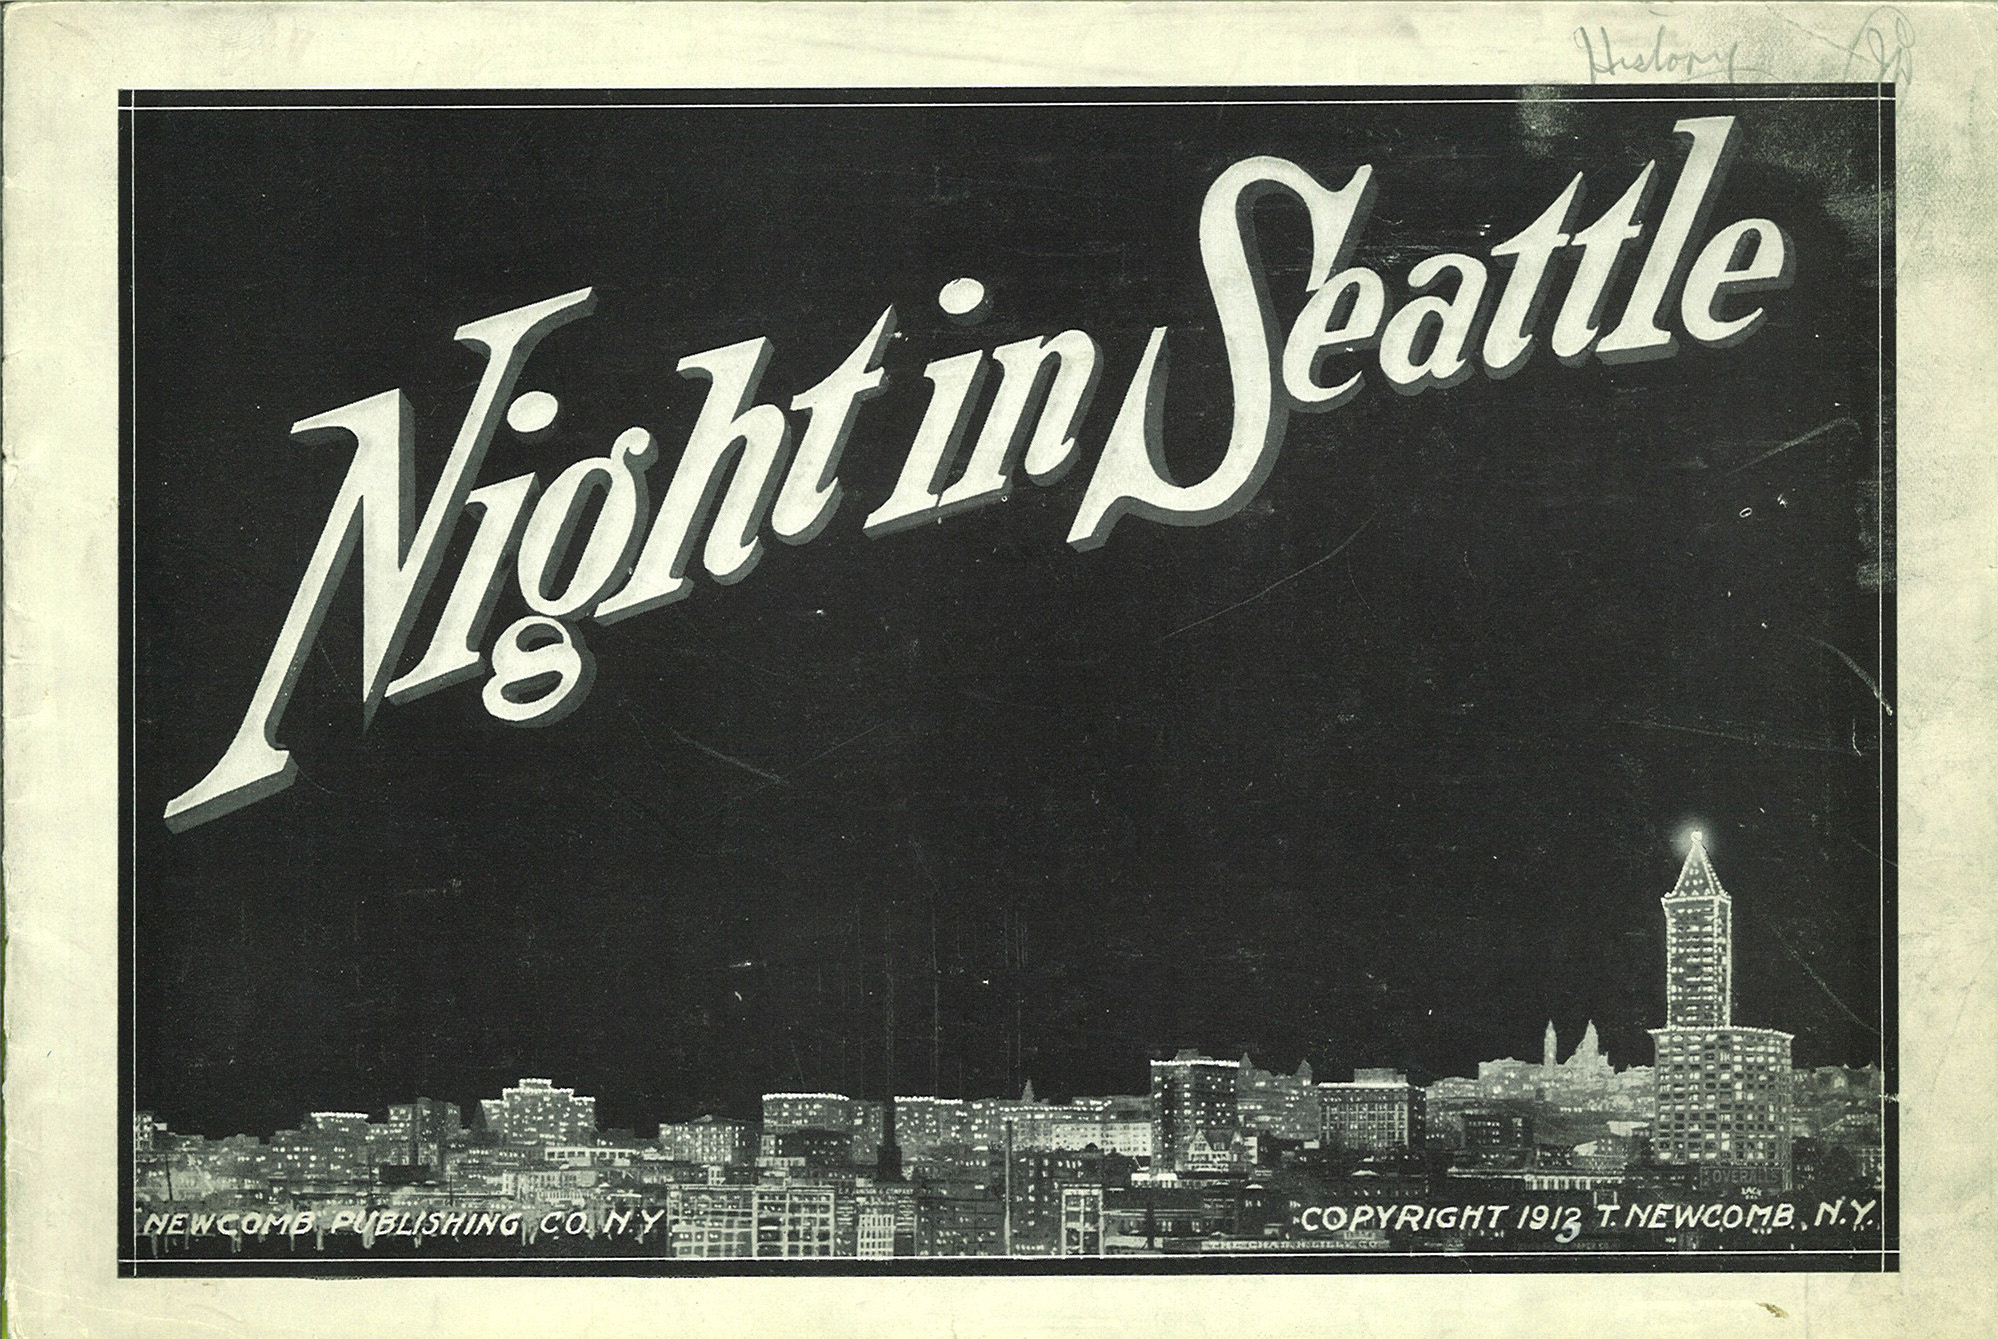 a night in seattle flyer from the 1920's